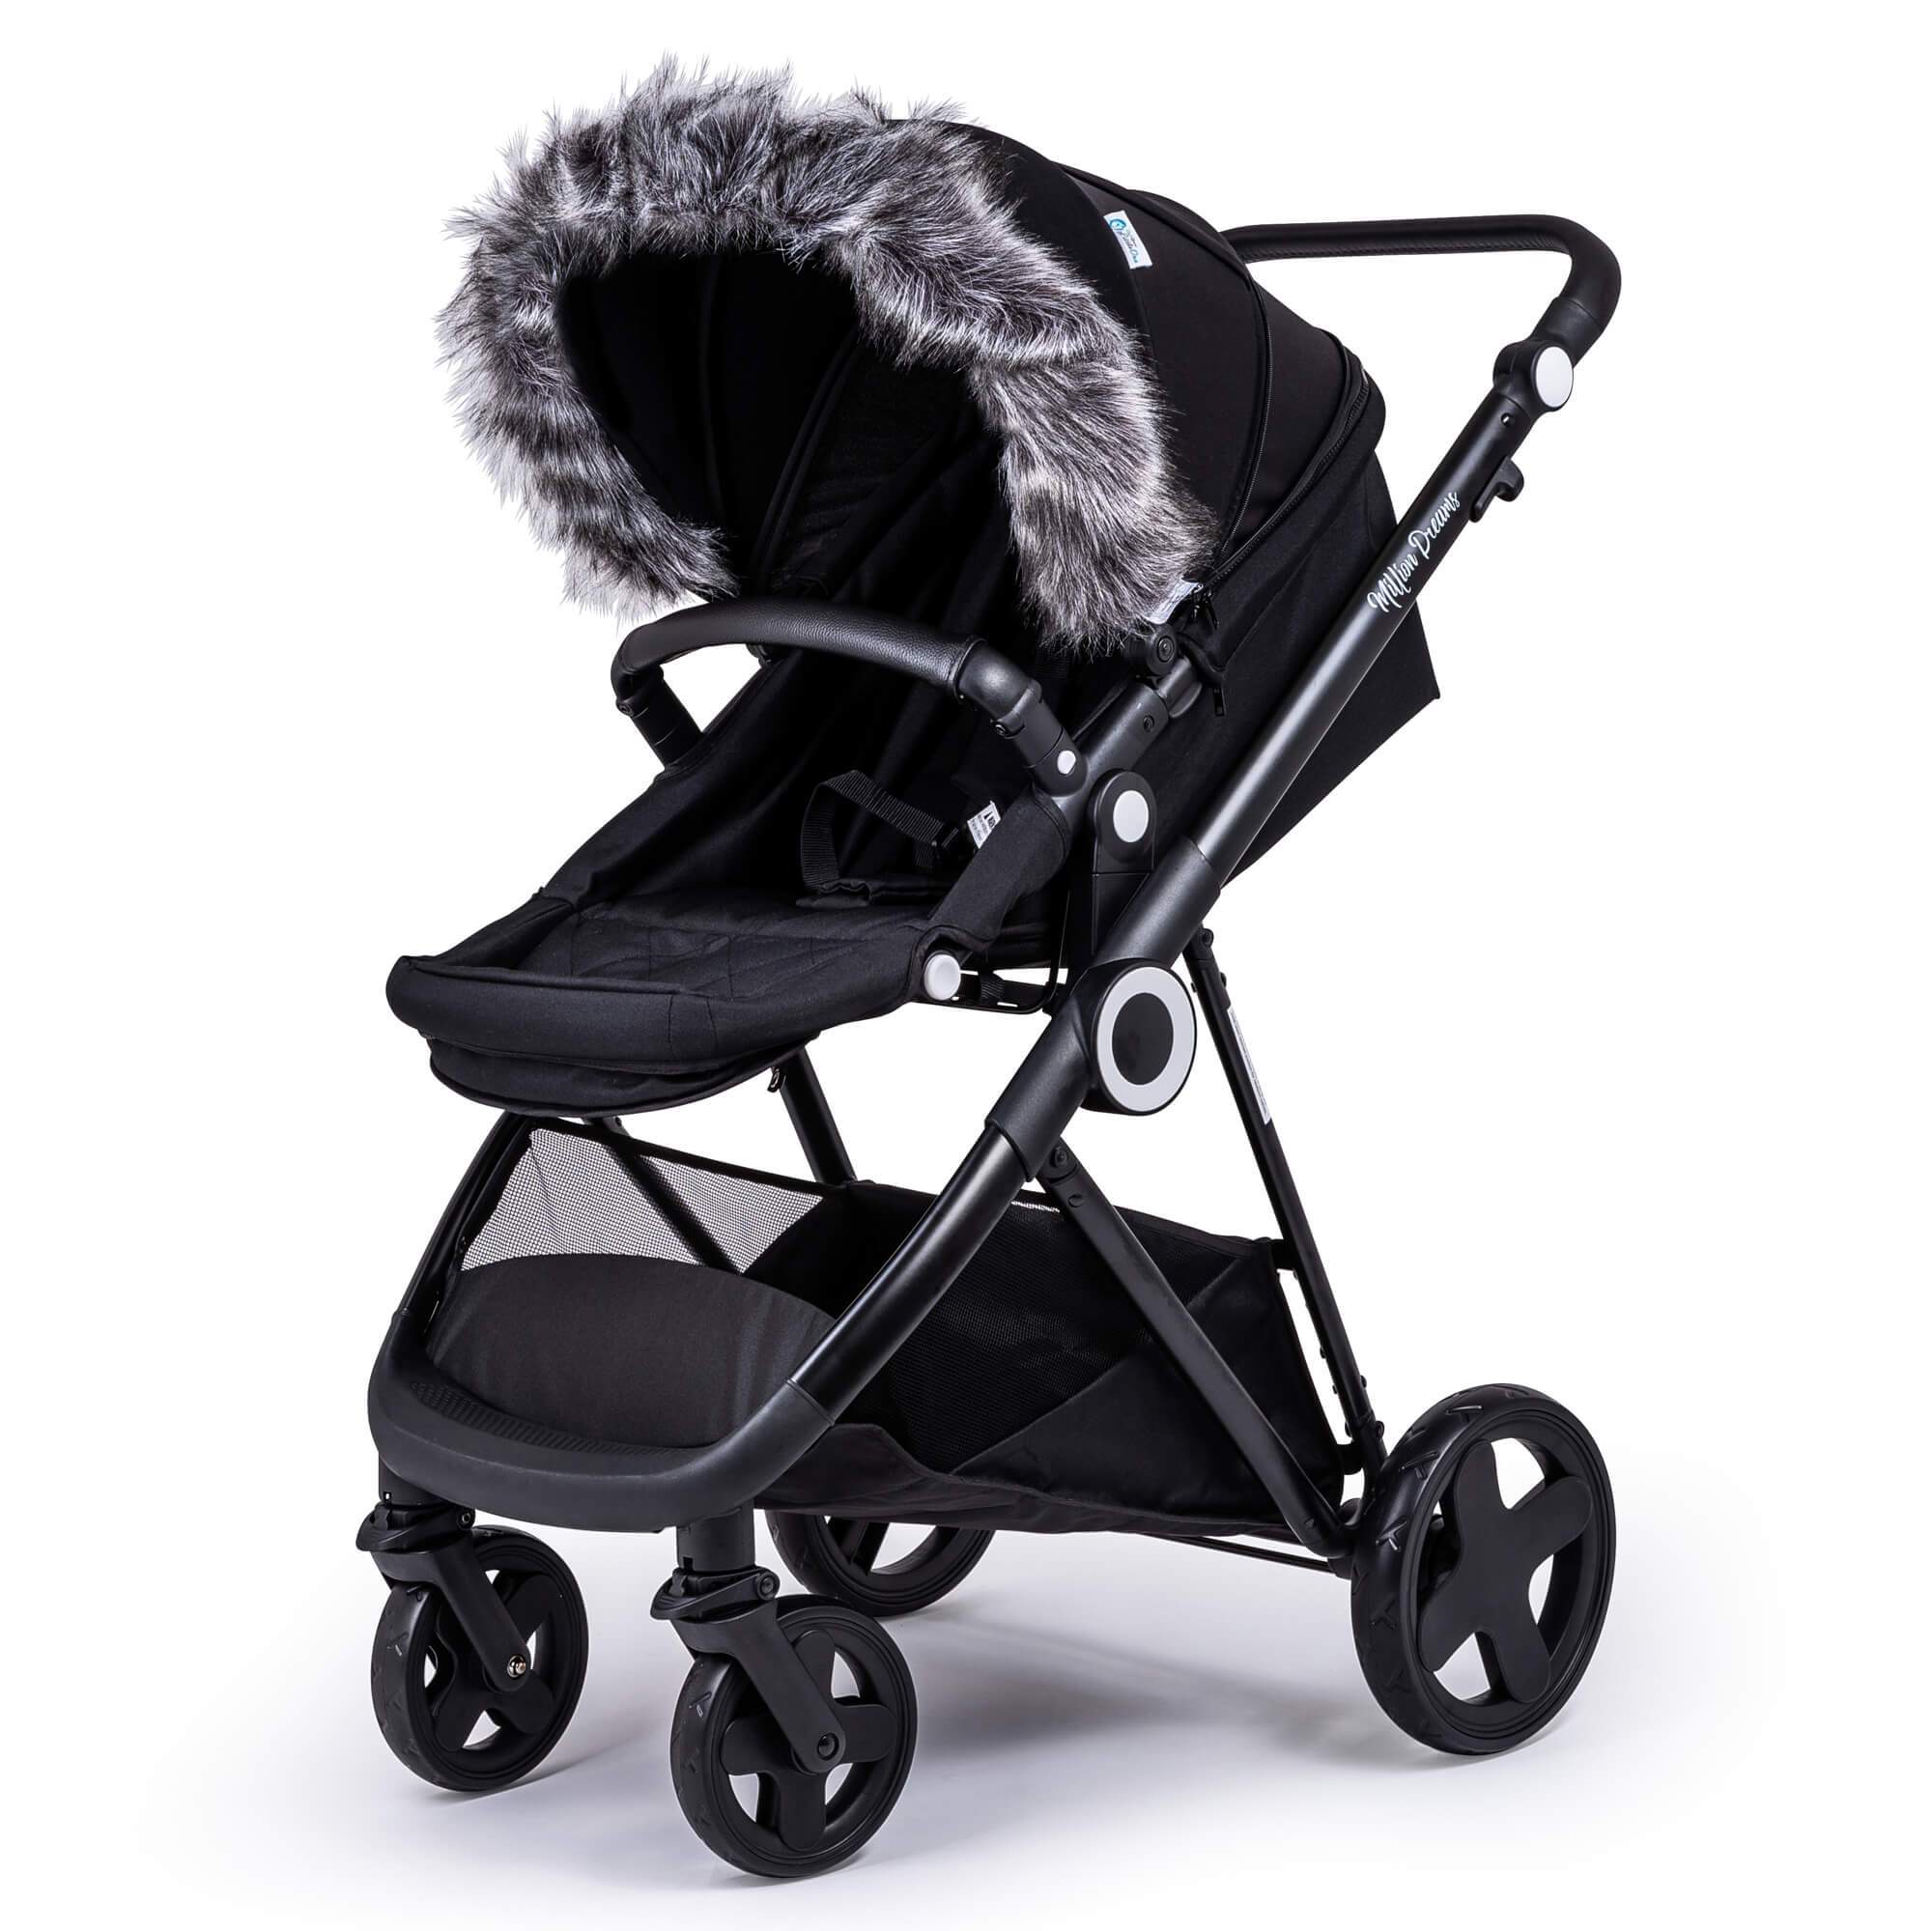 Pram Fur Hood Trim Attachment for Pushchair Compatible with BabiesRus - For Your Little One